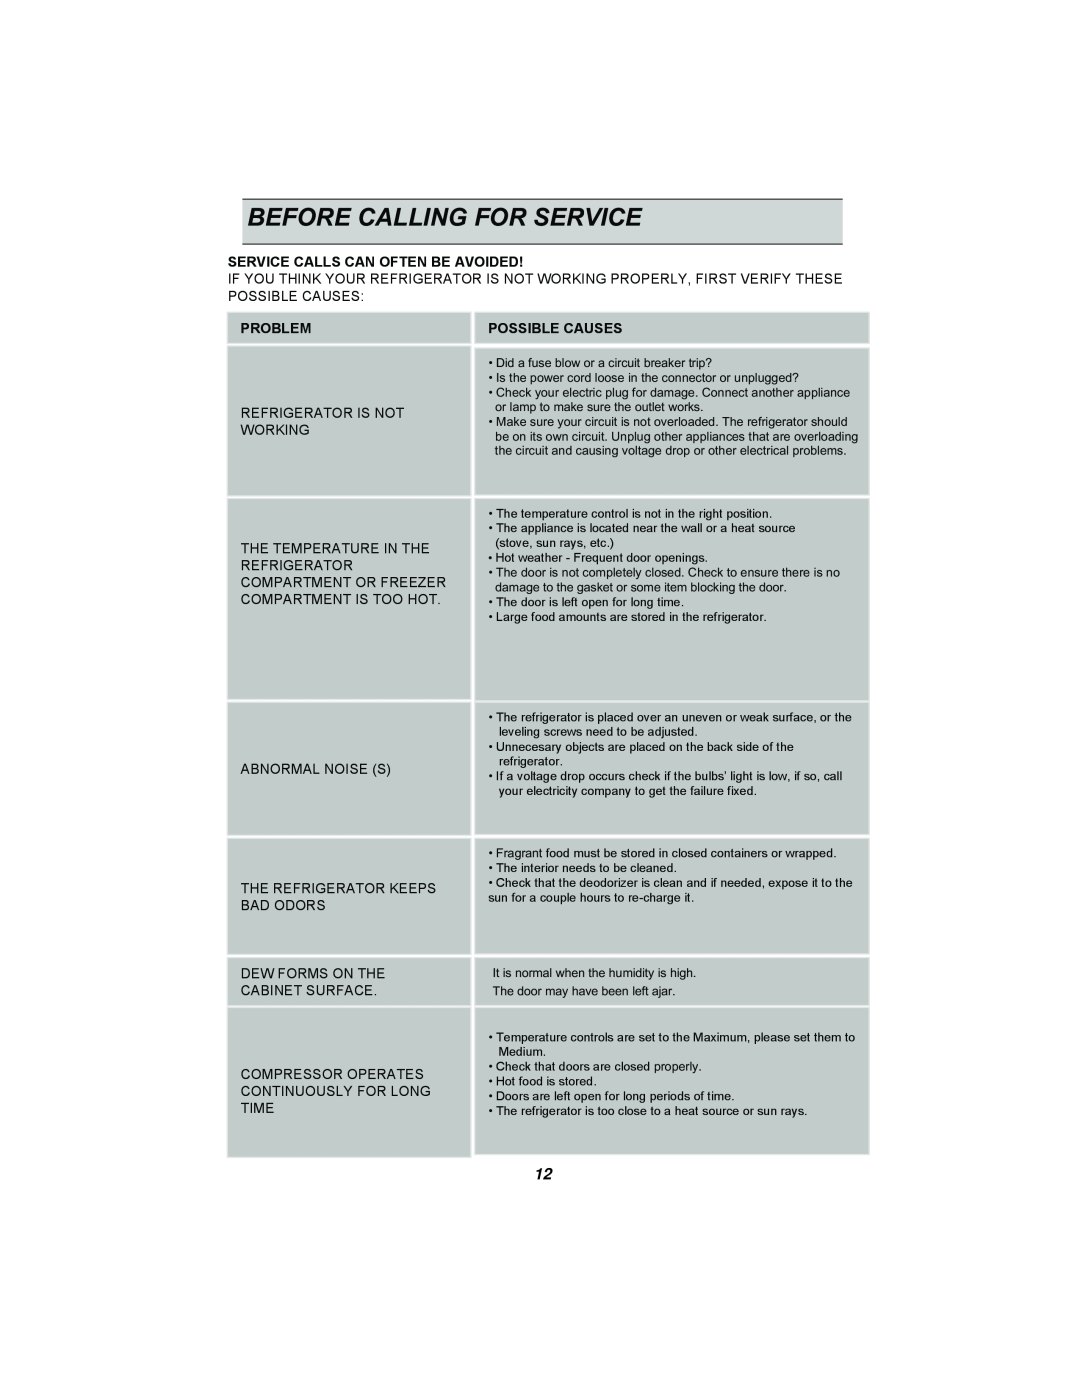 LG Electronics GR-382R manual Before Calling For Service, Service Calls Can Often Be Avoided, Problem, Possible Causes 